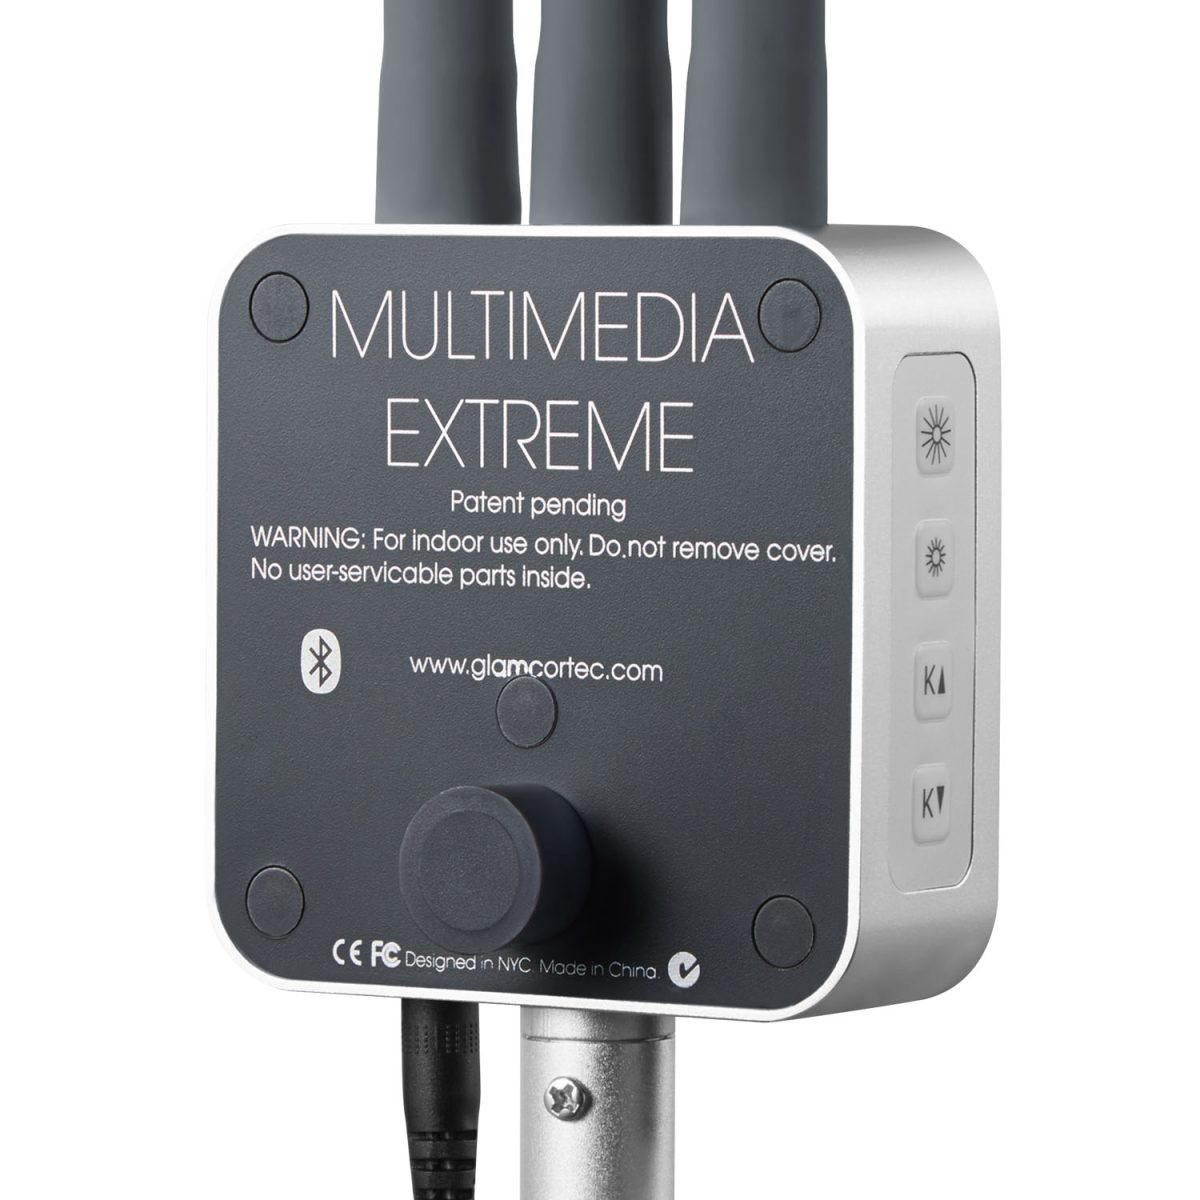 Glamcor multimedia extreme with selfie function